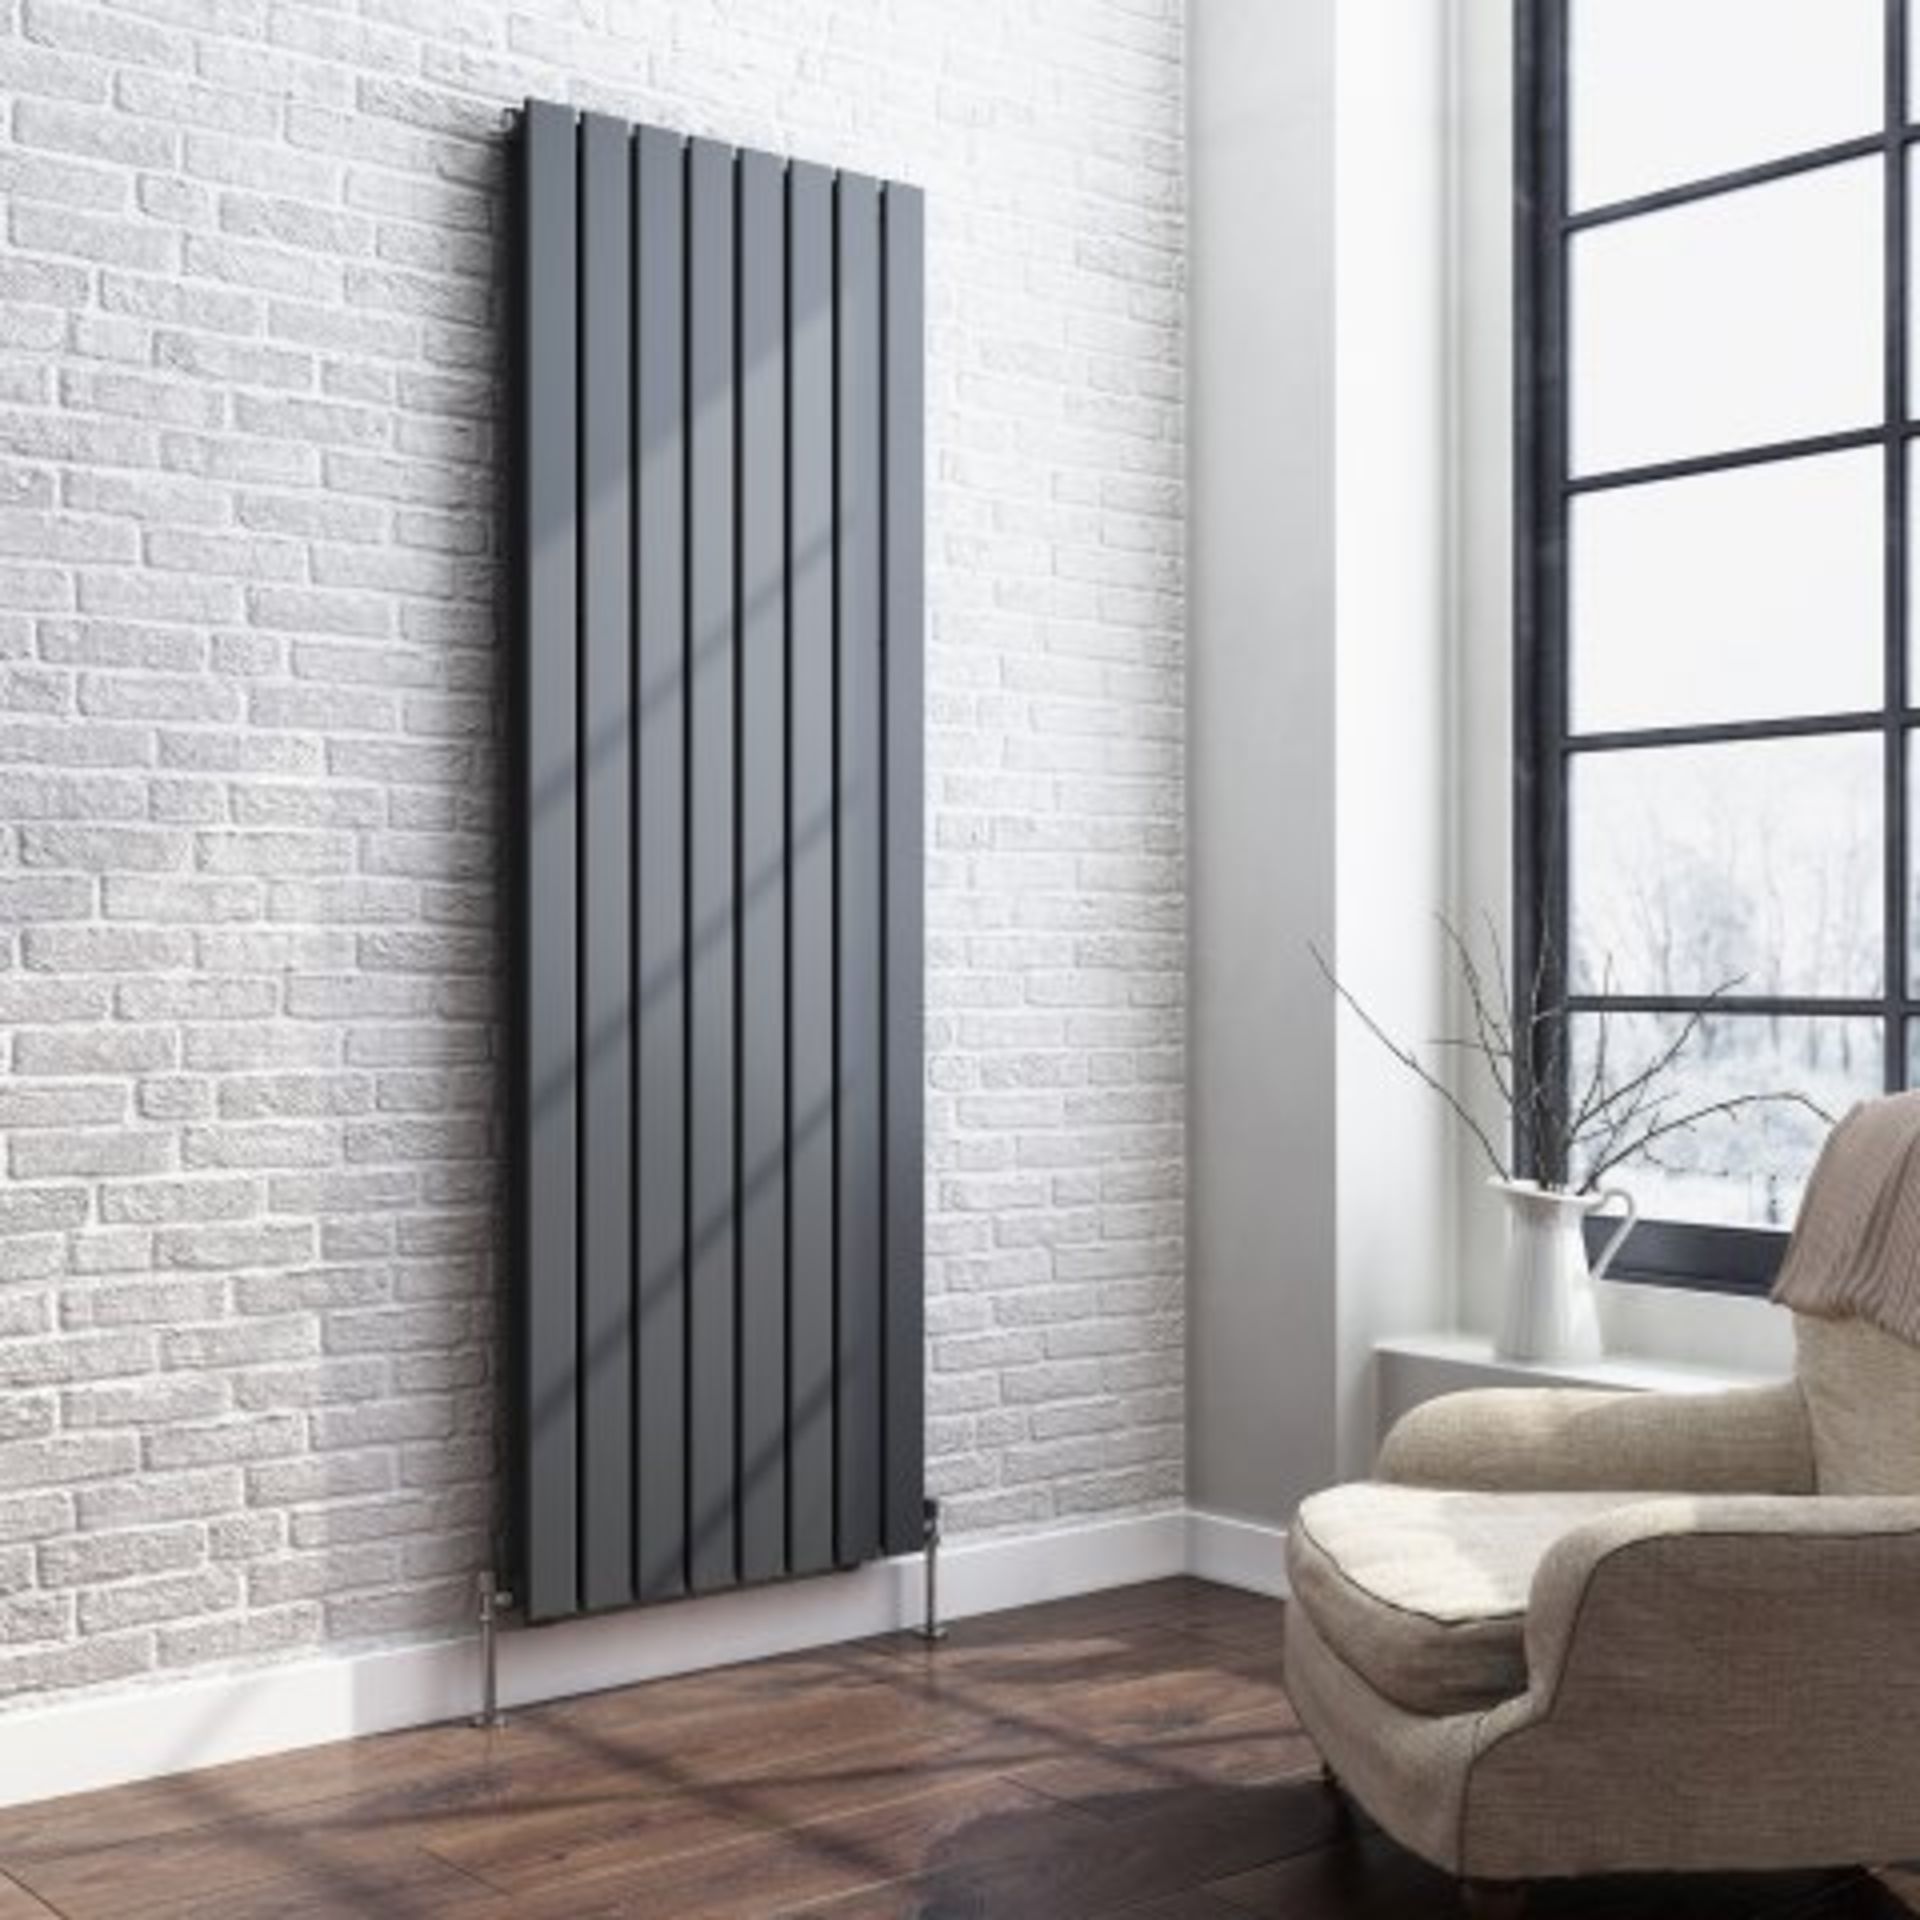 (I151) 1800x608mm Anthracite Double Flat Panel Vertical Radiator - Thera Premium. RRP £499.99. - Image 2 of 4